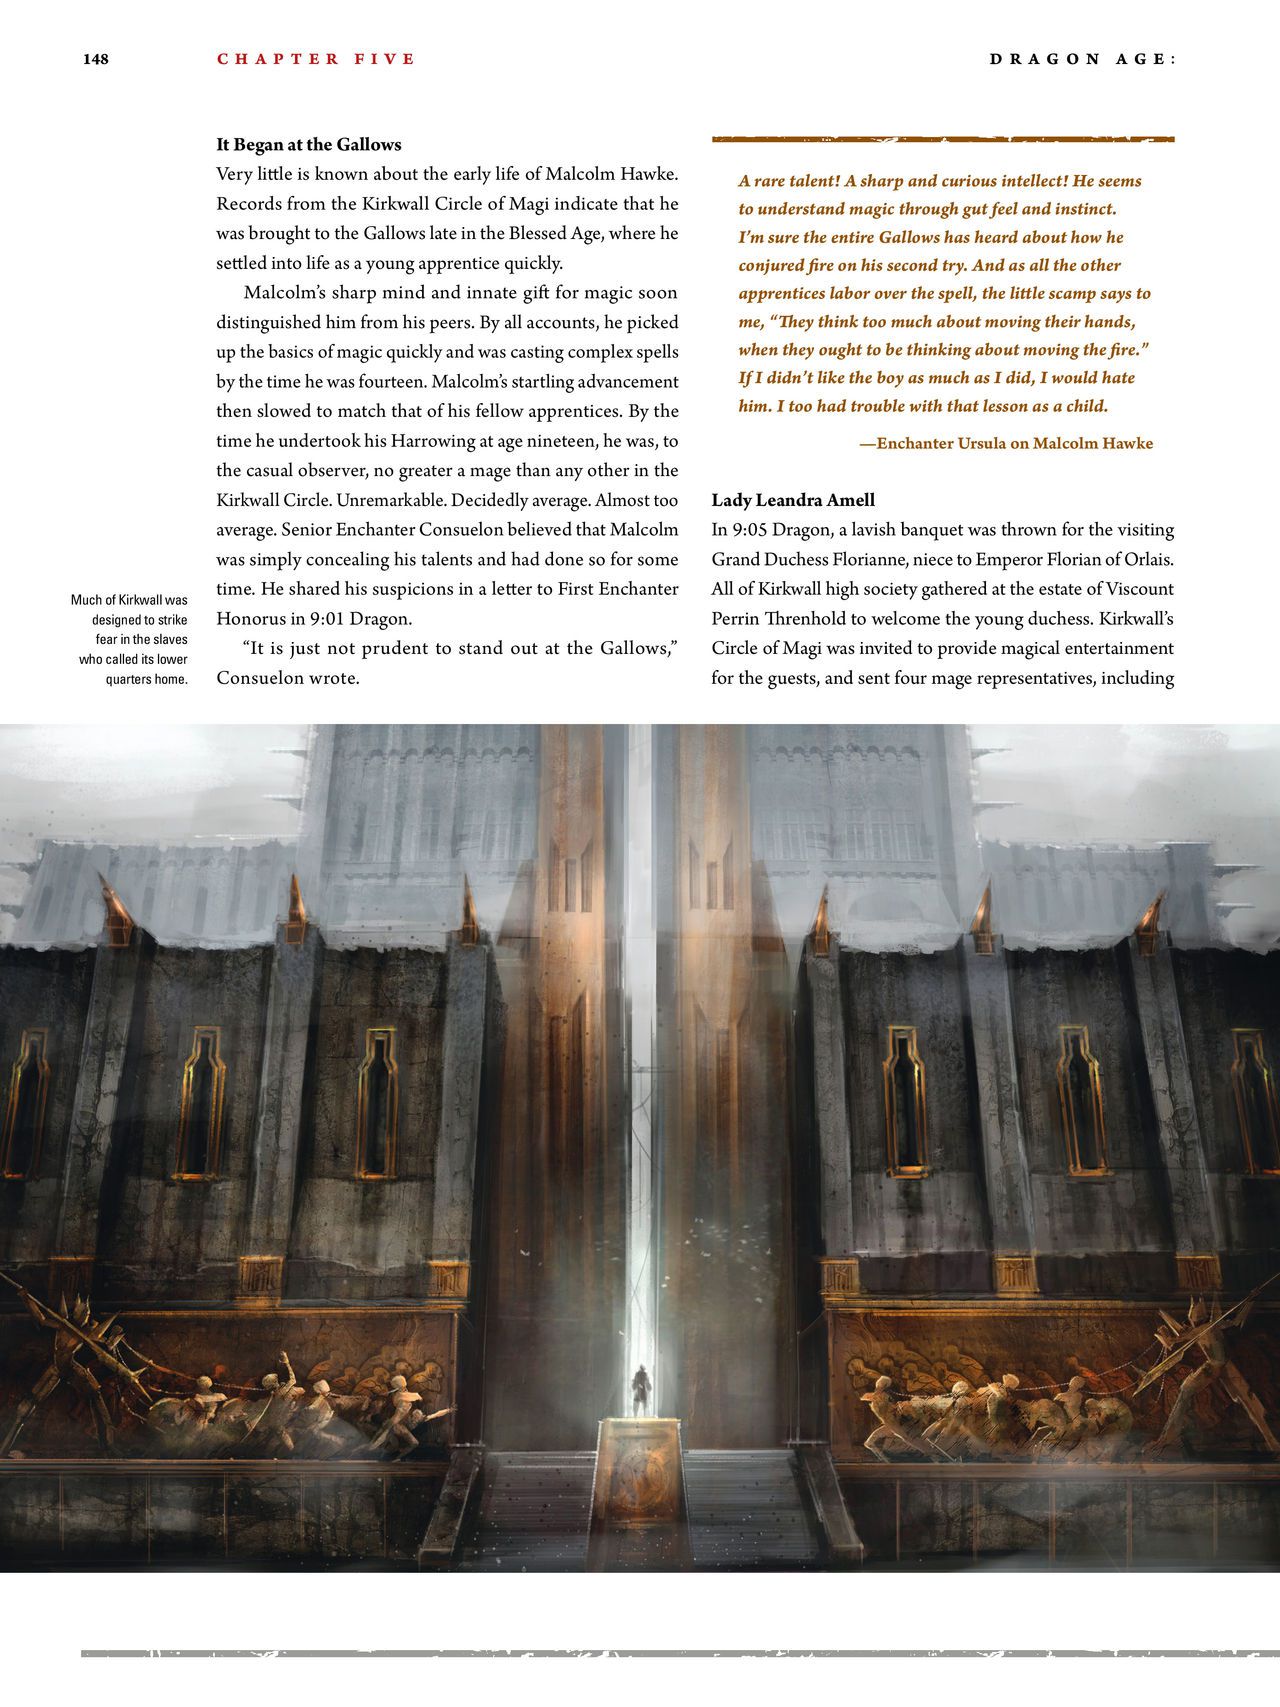 Dragon Age - The World of Thedas v02 144